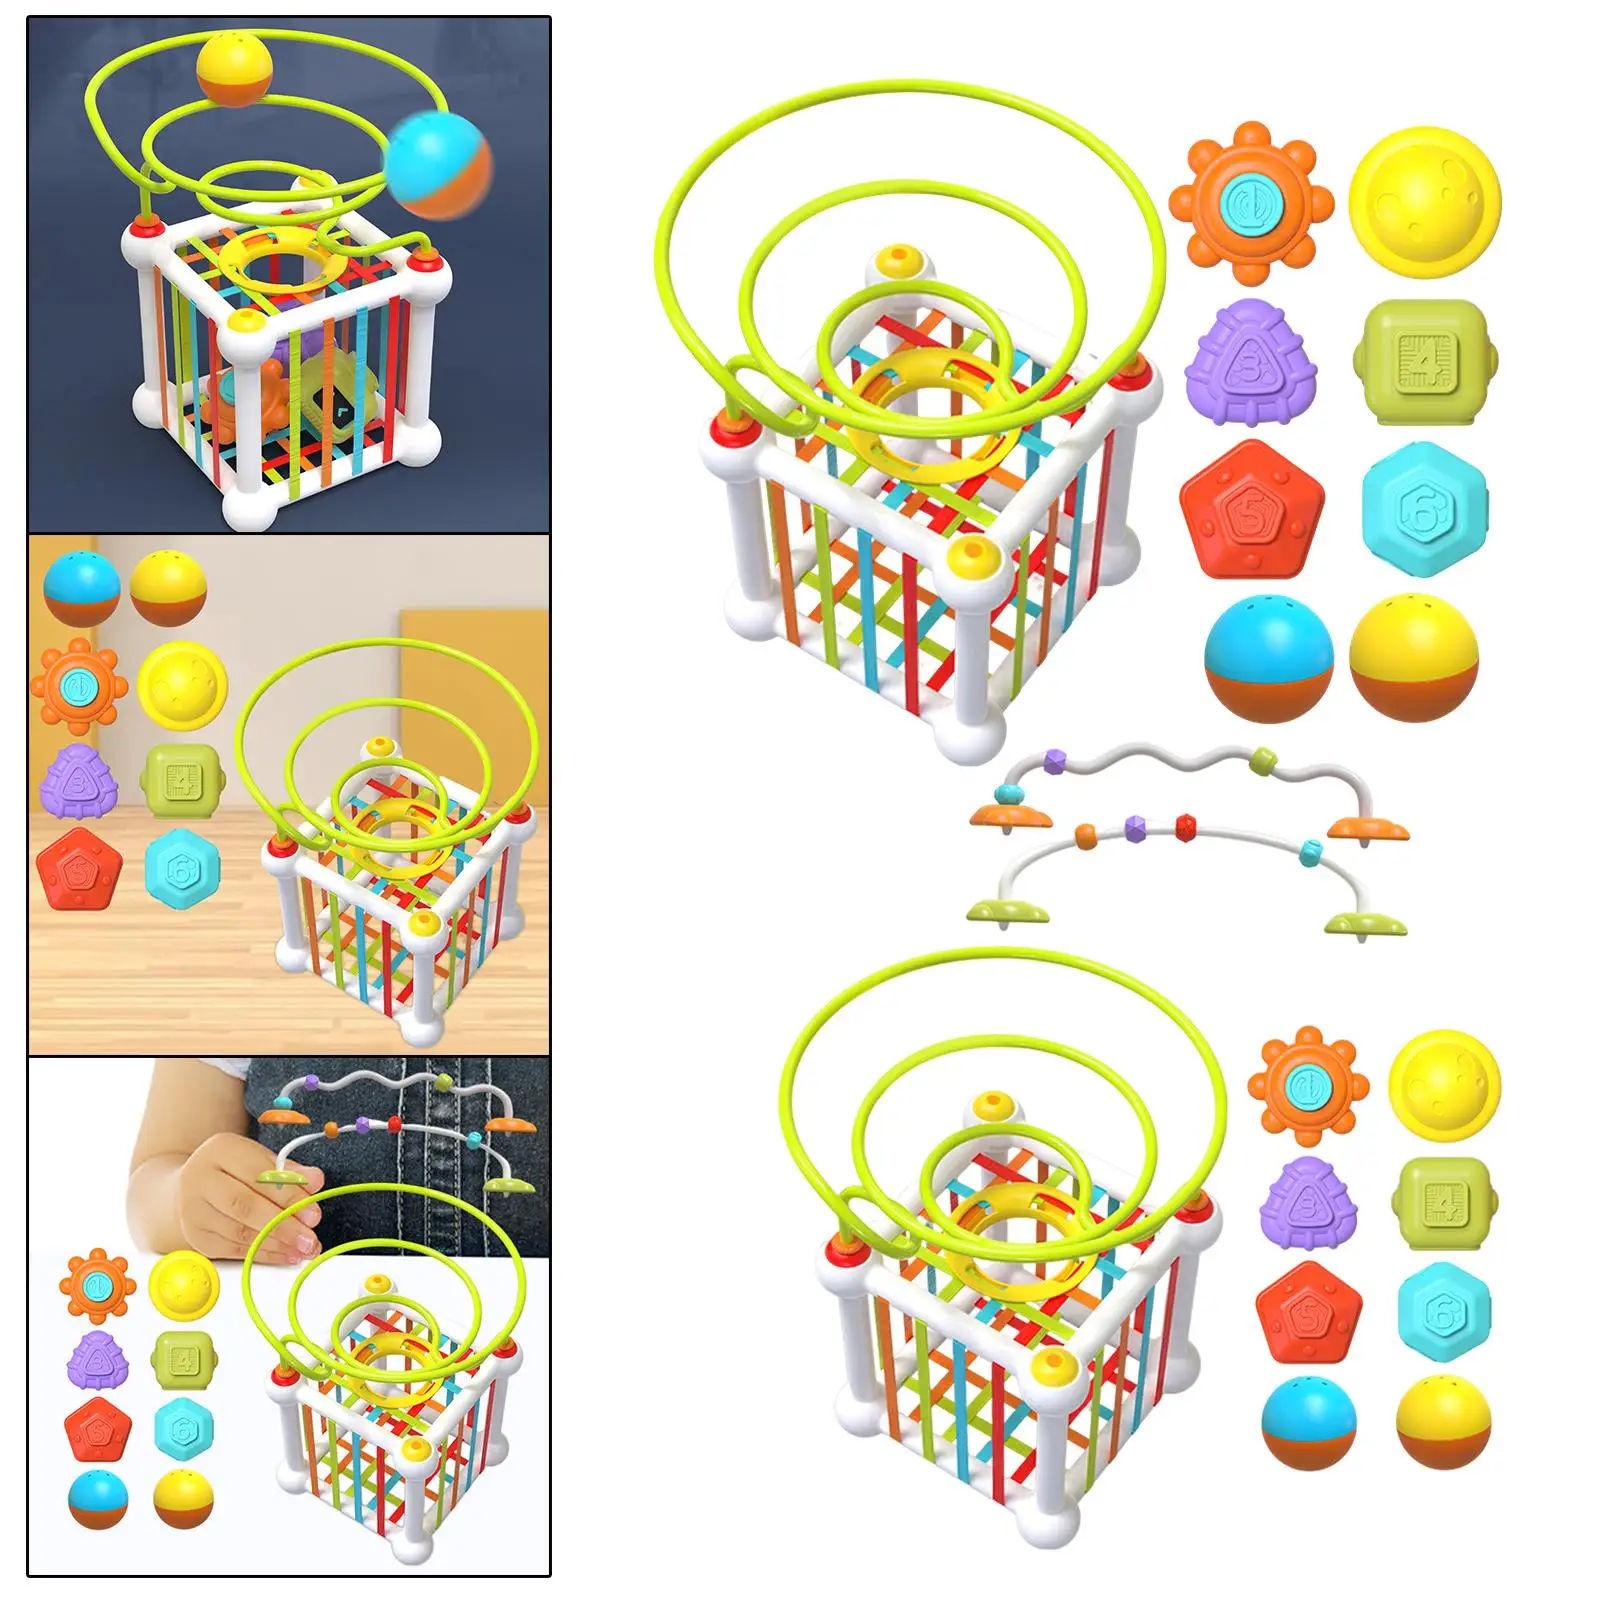 Toddlers Shape Sorter Toys Matching Fine Motor Skills Textured Balls Sorting Games for Sensory Exploration Creativity Activity